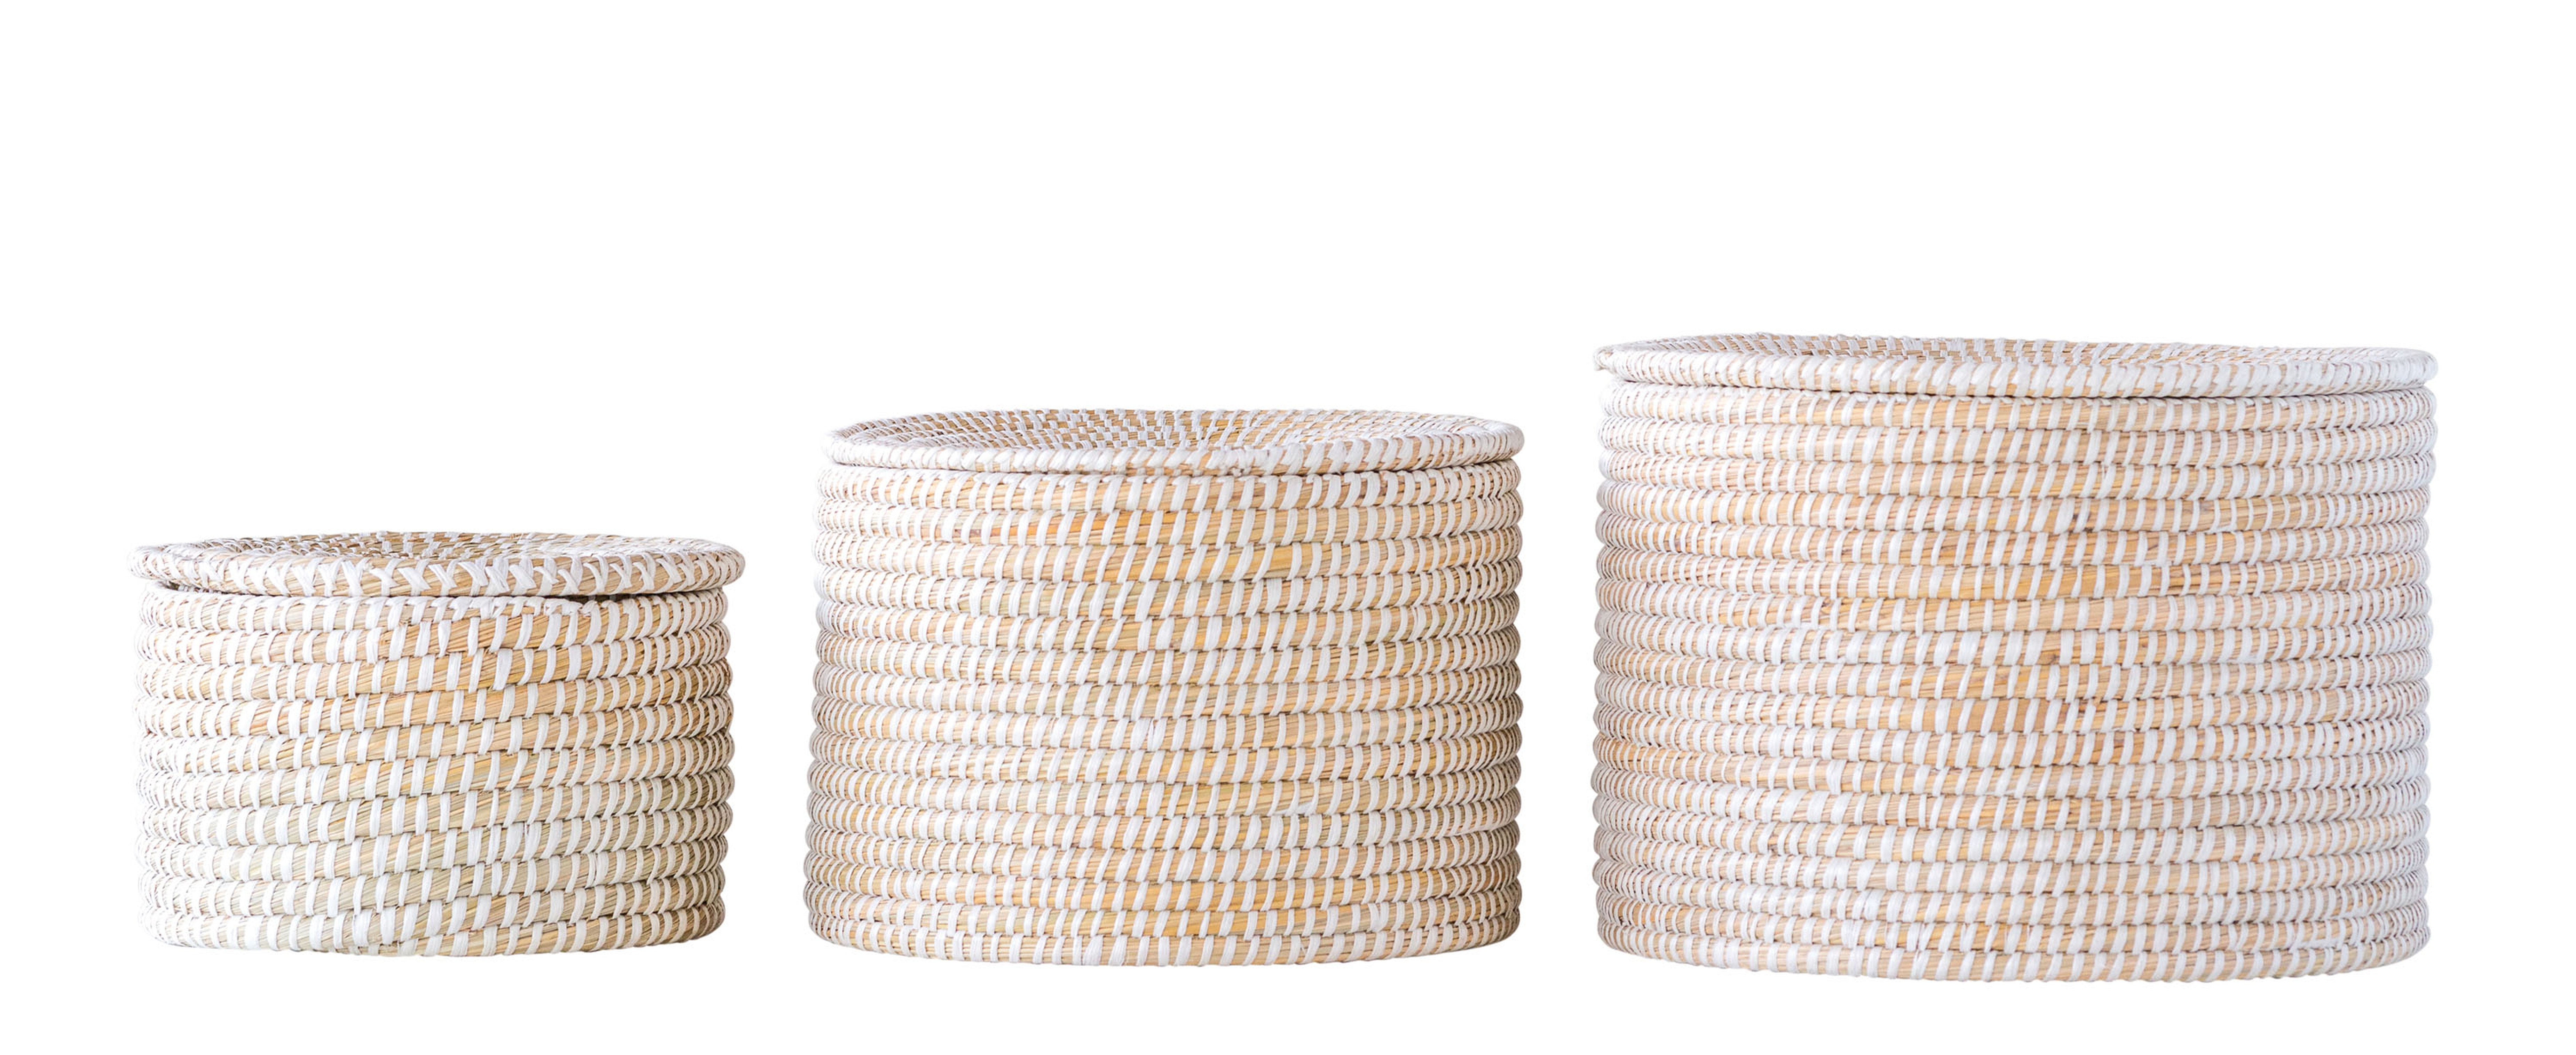 Woven Seagrass Baskets with Lids, Whitewashed, Set of 3 - Nomad Home